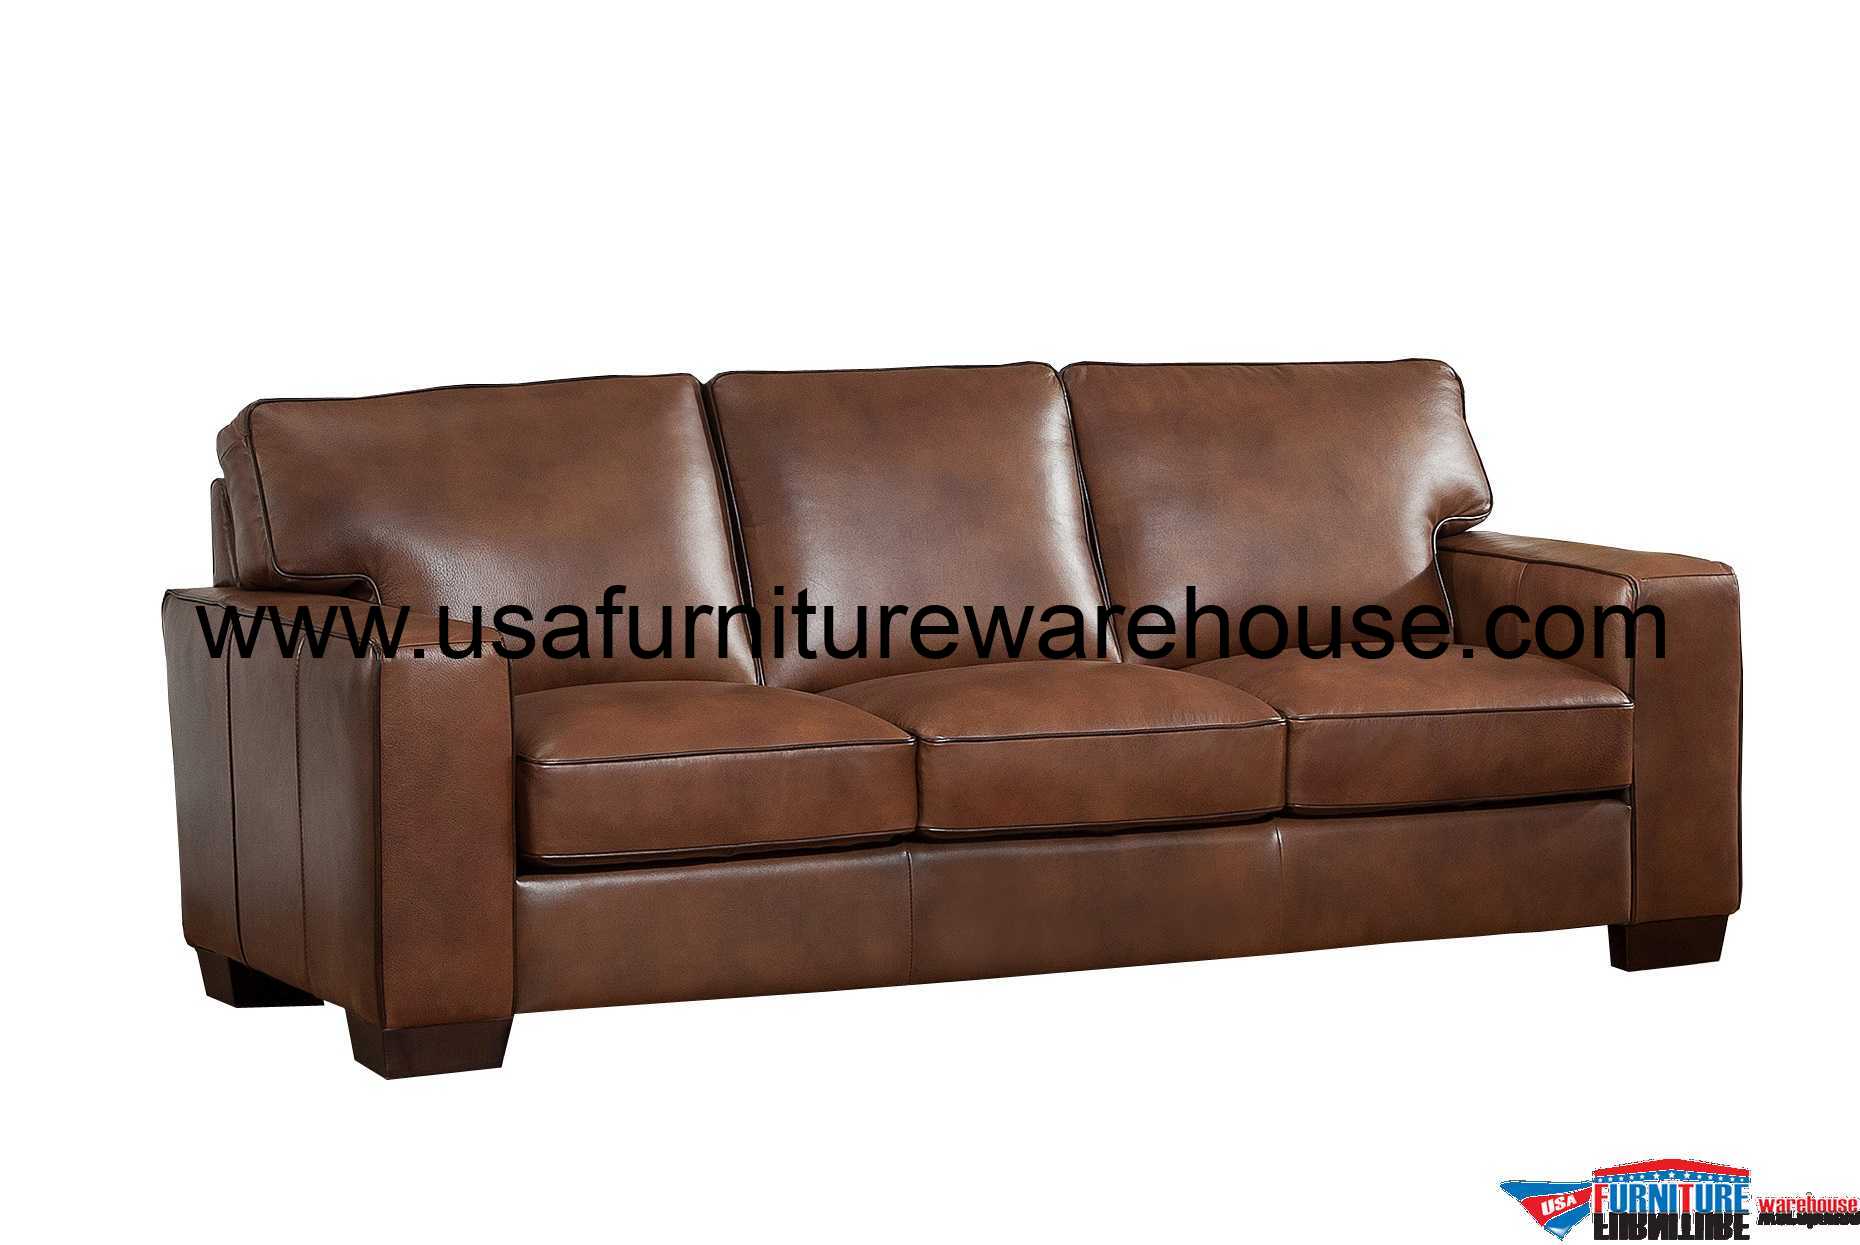 puffy brown leather sofa andxrecliner set